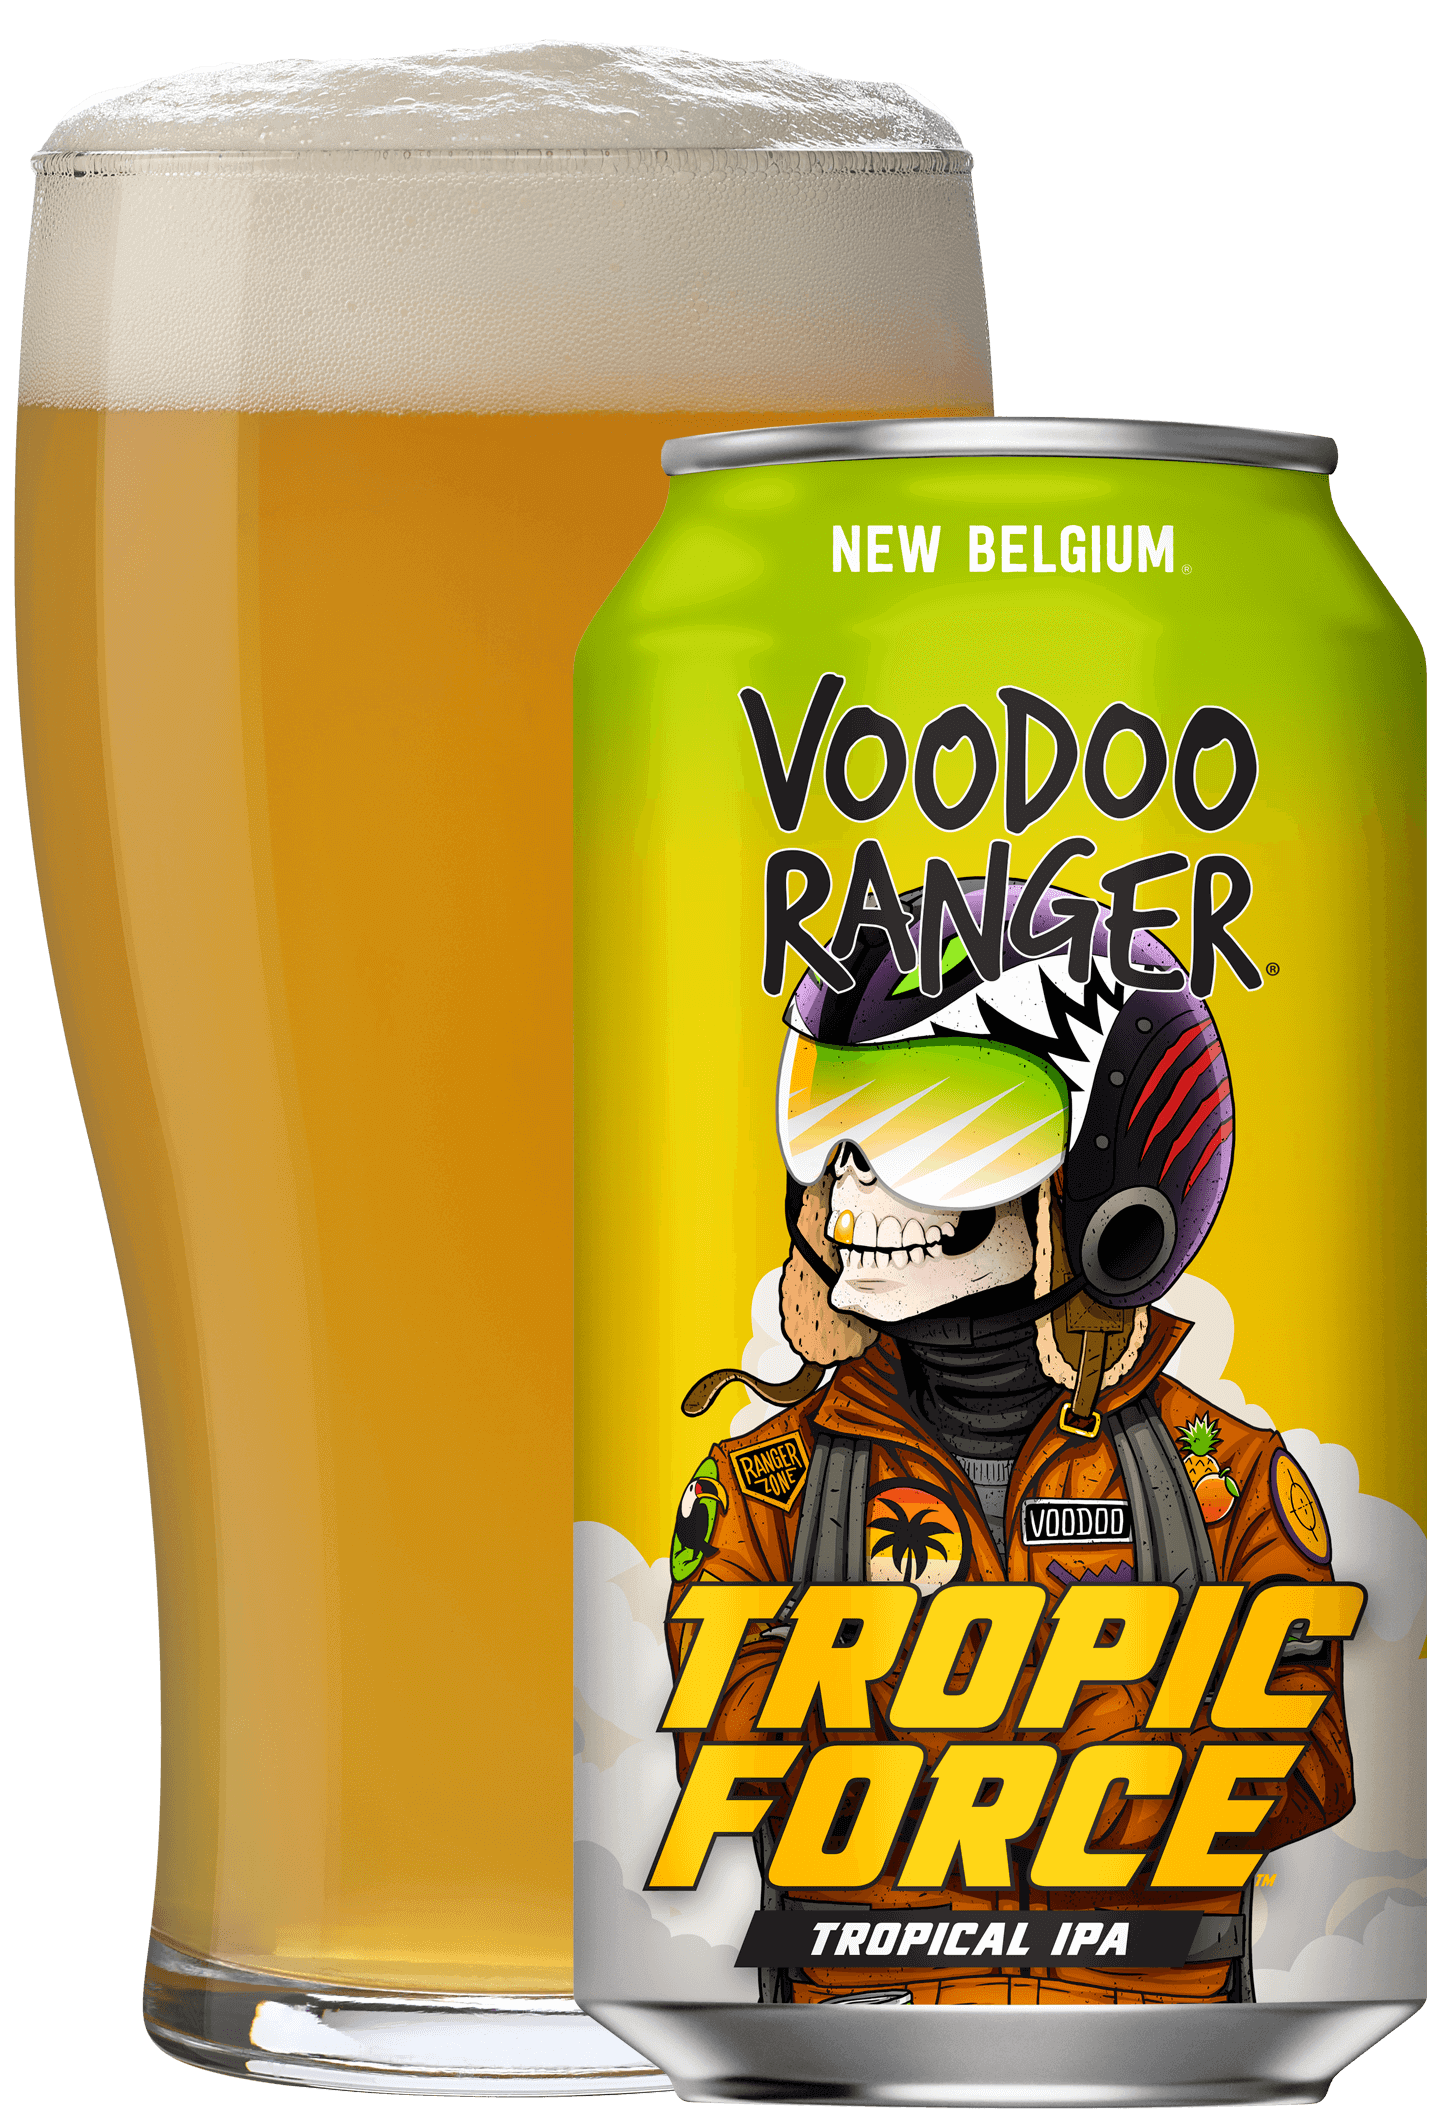 Voodoo Ranger Tropic force beer can and glass filled with beer